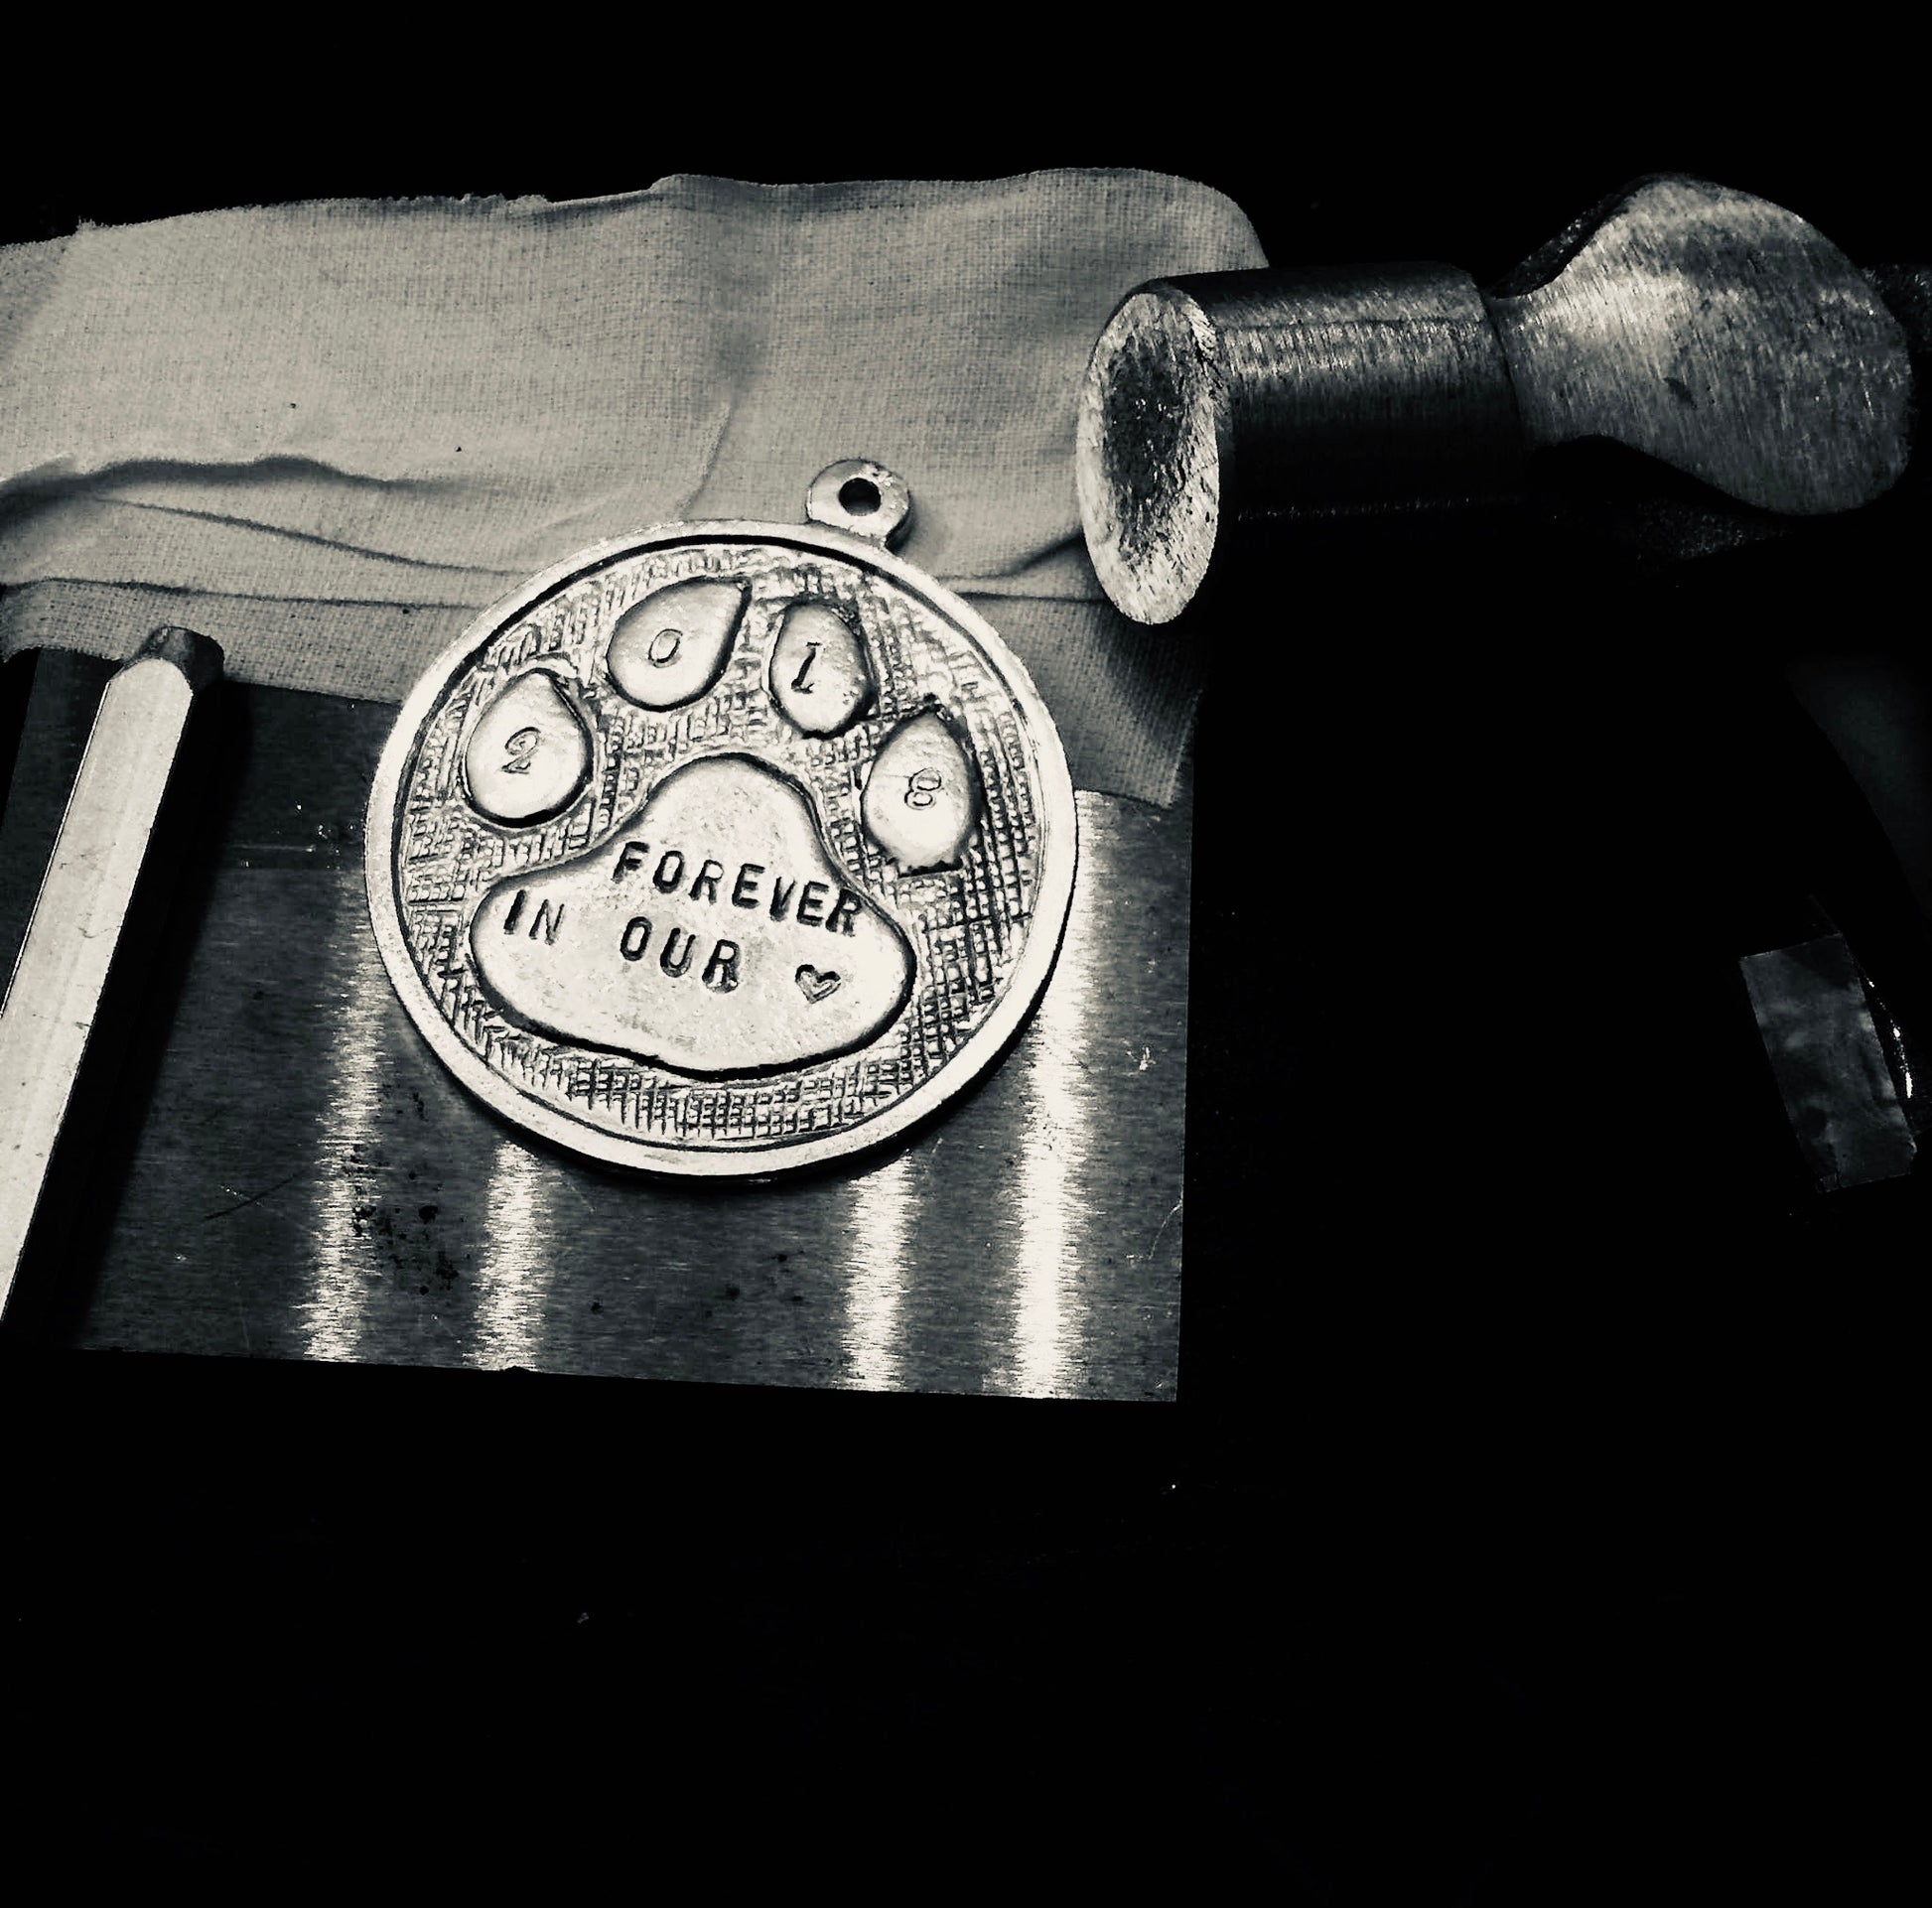 872 Pet Dog Paw Hand Stamped Memorial Ornament Pewter - House of Morgan Pewter